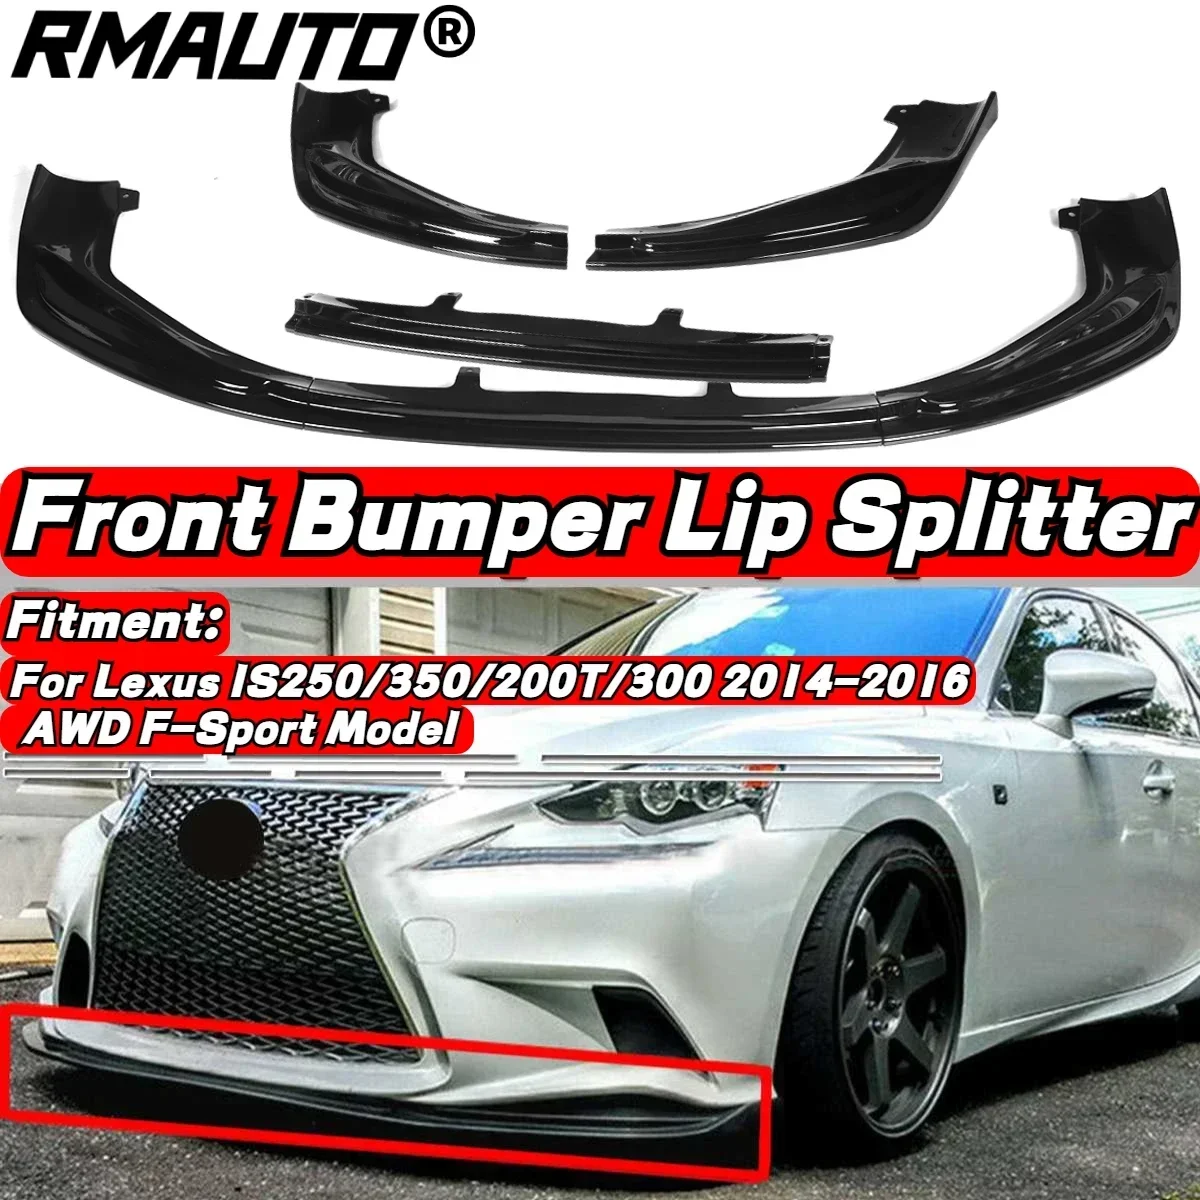 

RMAUTO Car Front Bumper Splitter Lip Diffuser Protector Spoiler Chin For Lexus IS250 IS350 IS300 F-Sport 2014-2016 Body Kit